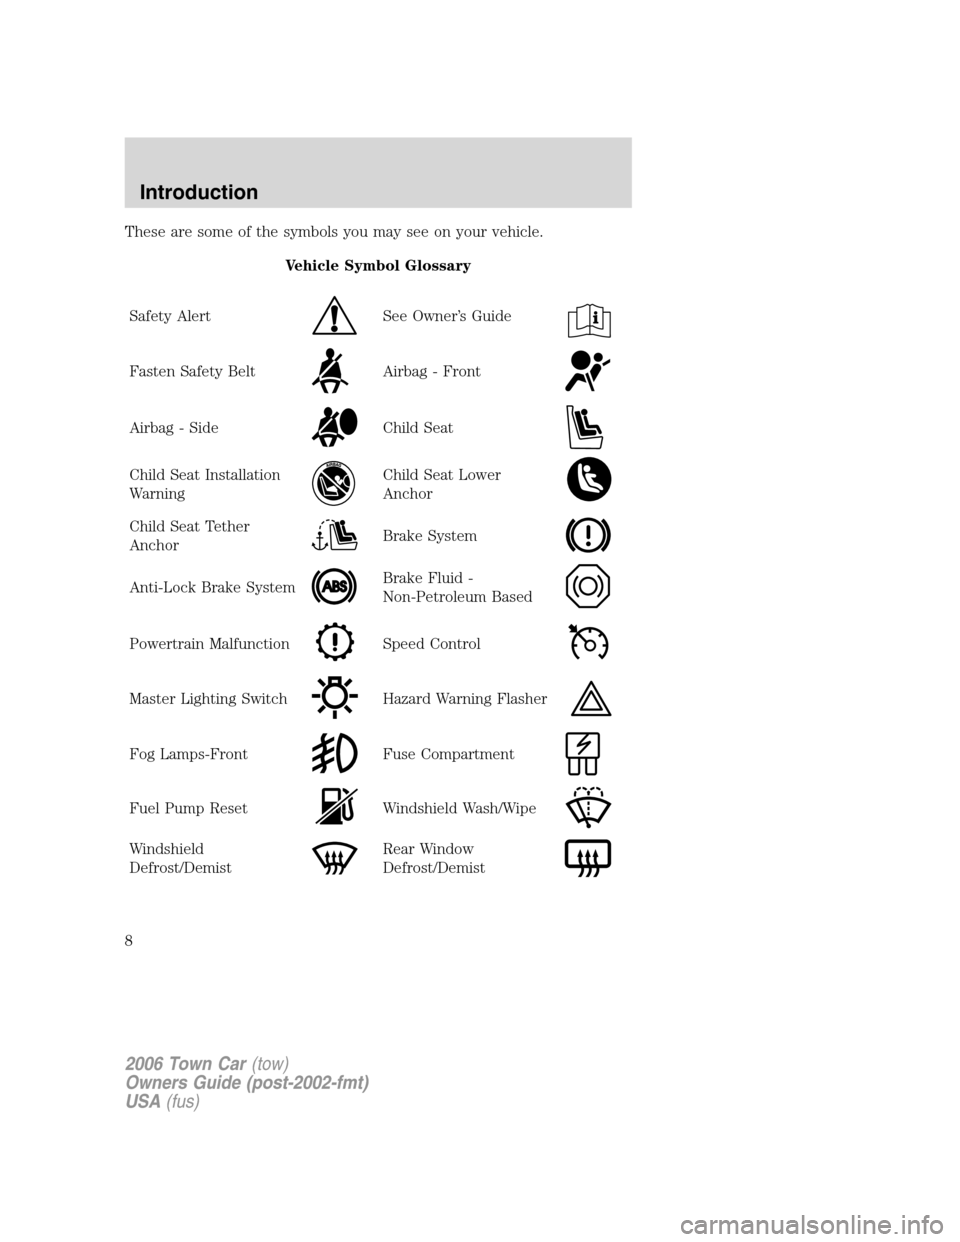 LINCOLN TOWN CAR 2006  Owners Manual These are some of the symbols you may see on your vehicle.
Vehicle Symbol Glossary
Safety Alert
See Owner’s Guide
Fasten Safety BeltAirbag - Front
Airbag - SideChild Seat
Child Seat Installation
War